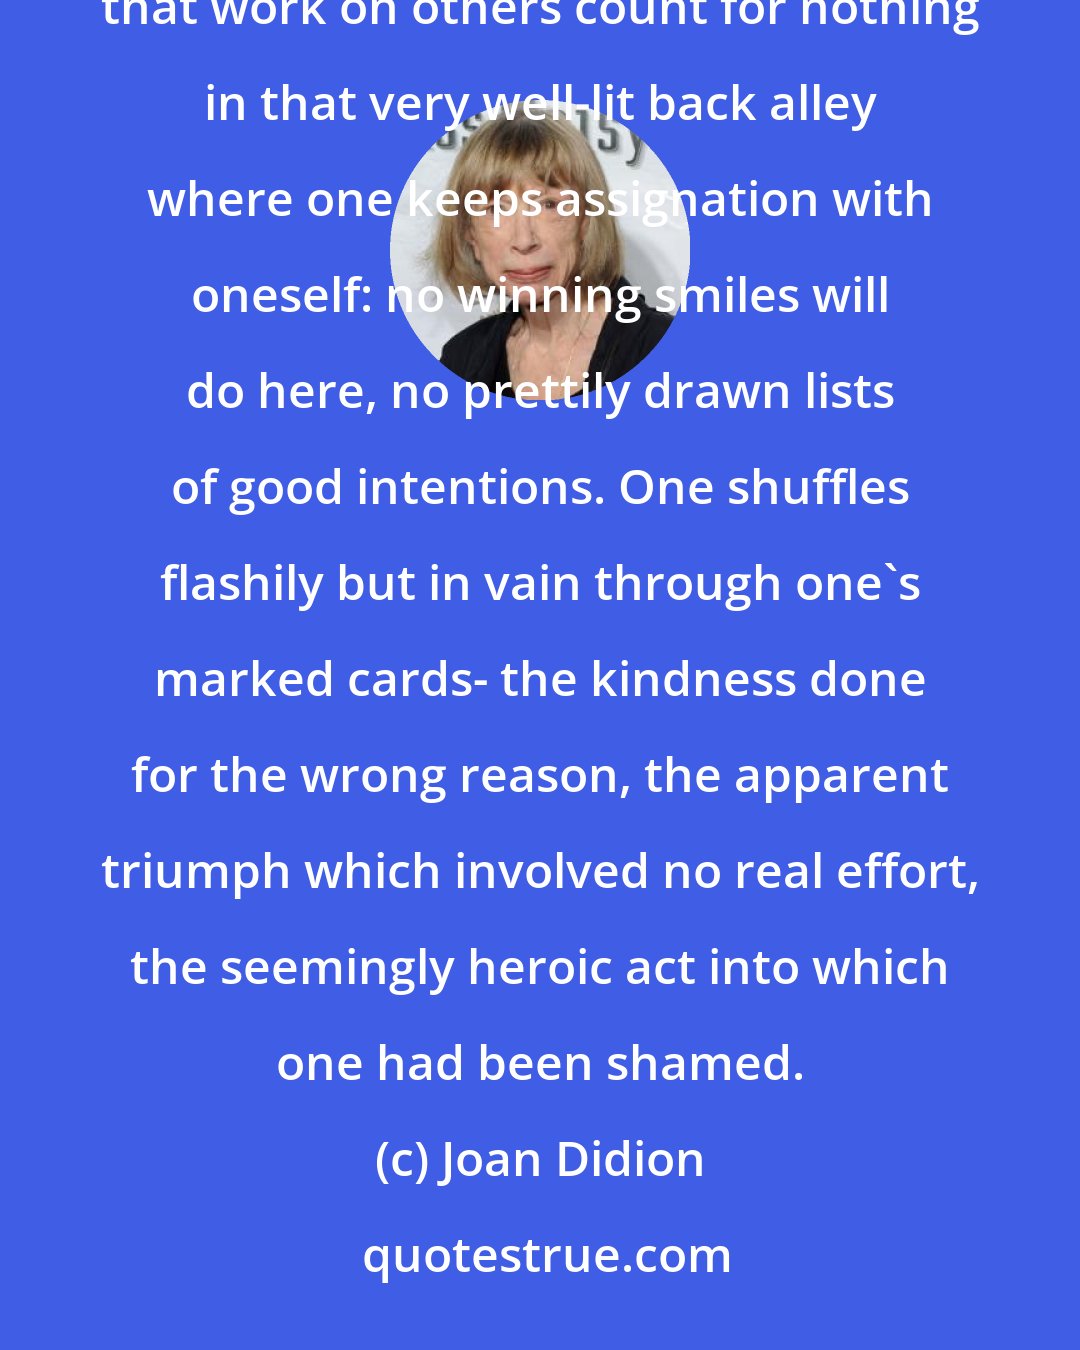 Joan Didion: Most of our platitudes notwithstanding, self-deception remains the most difficult deception. The tricks that work on others count for nothing in that very well-lit back alley where one keeps assignation with oneself: no winning smiles will do here, no prettily drawn lists of good intentions. One shuffles flashily but in vain through one's marked cards- the kindness done for the wrong reason, the apparent triumph which involved no real effort, the seemingly heroic act into which one had been shamed.